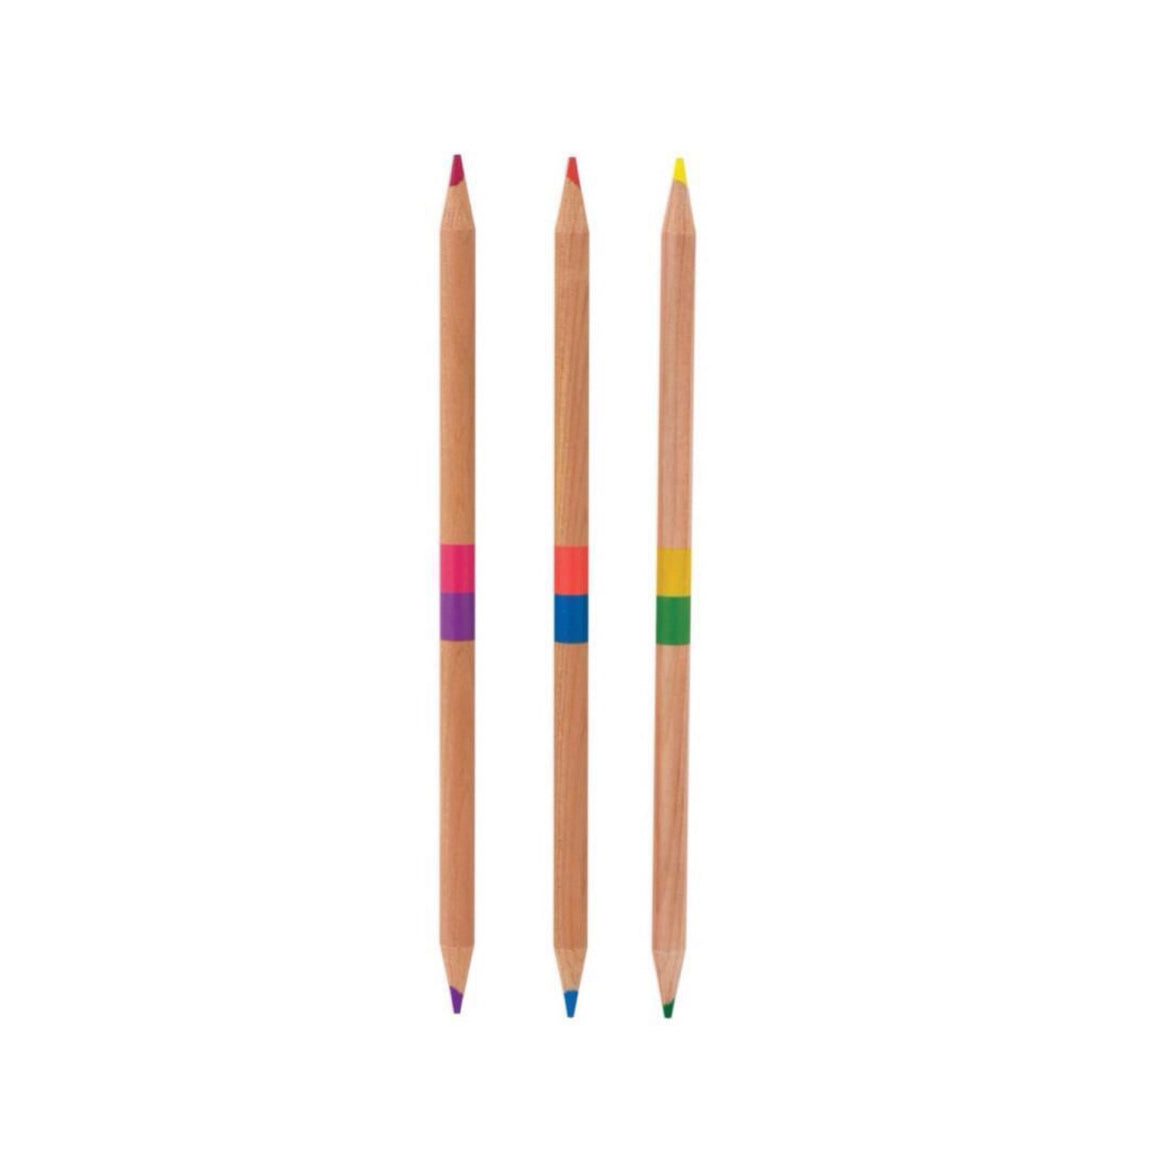 STATIONERY - PENCILS TWO OF A KIND COLOUR, Stationery, OOLY - Bon + Co. Party Studio